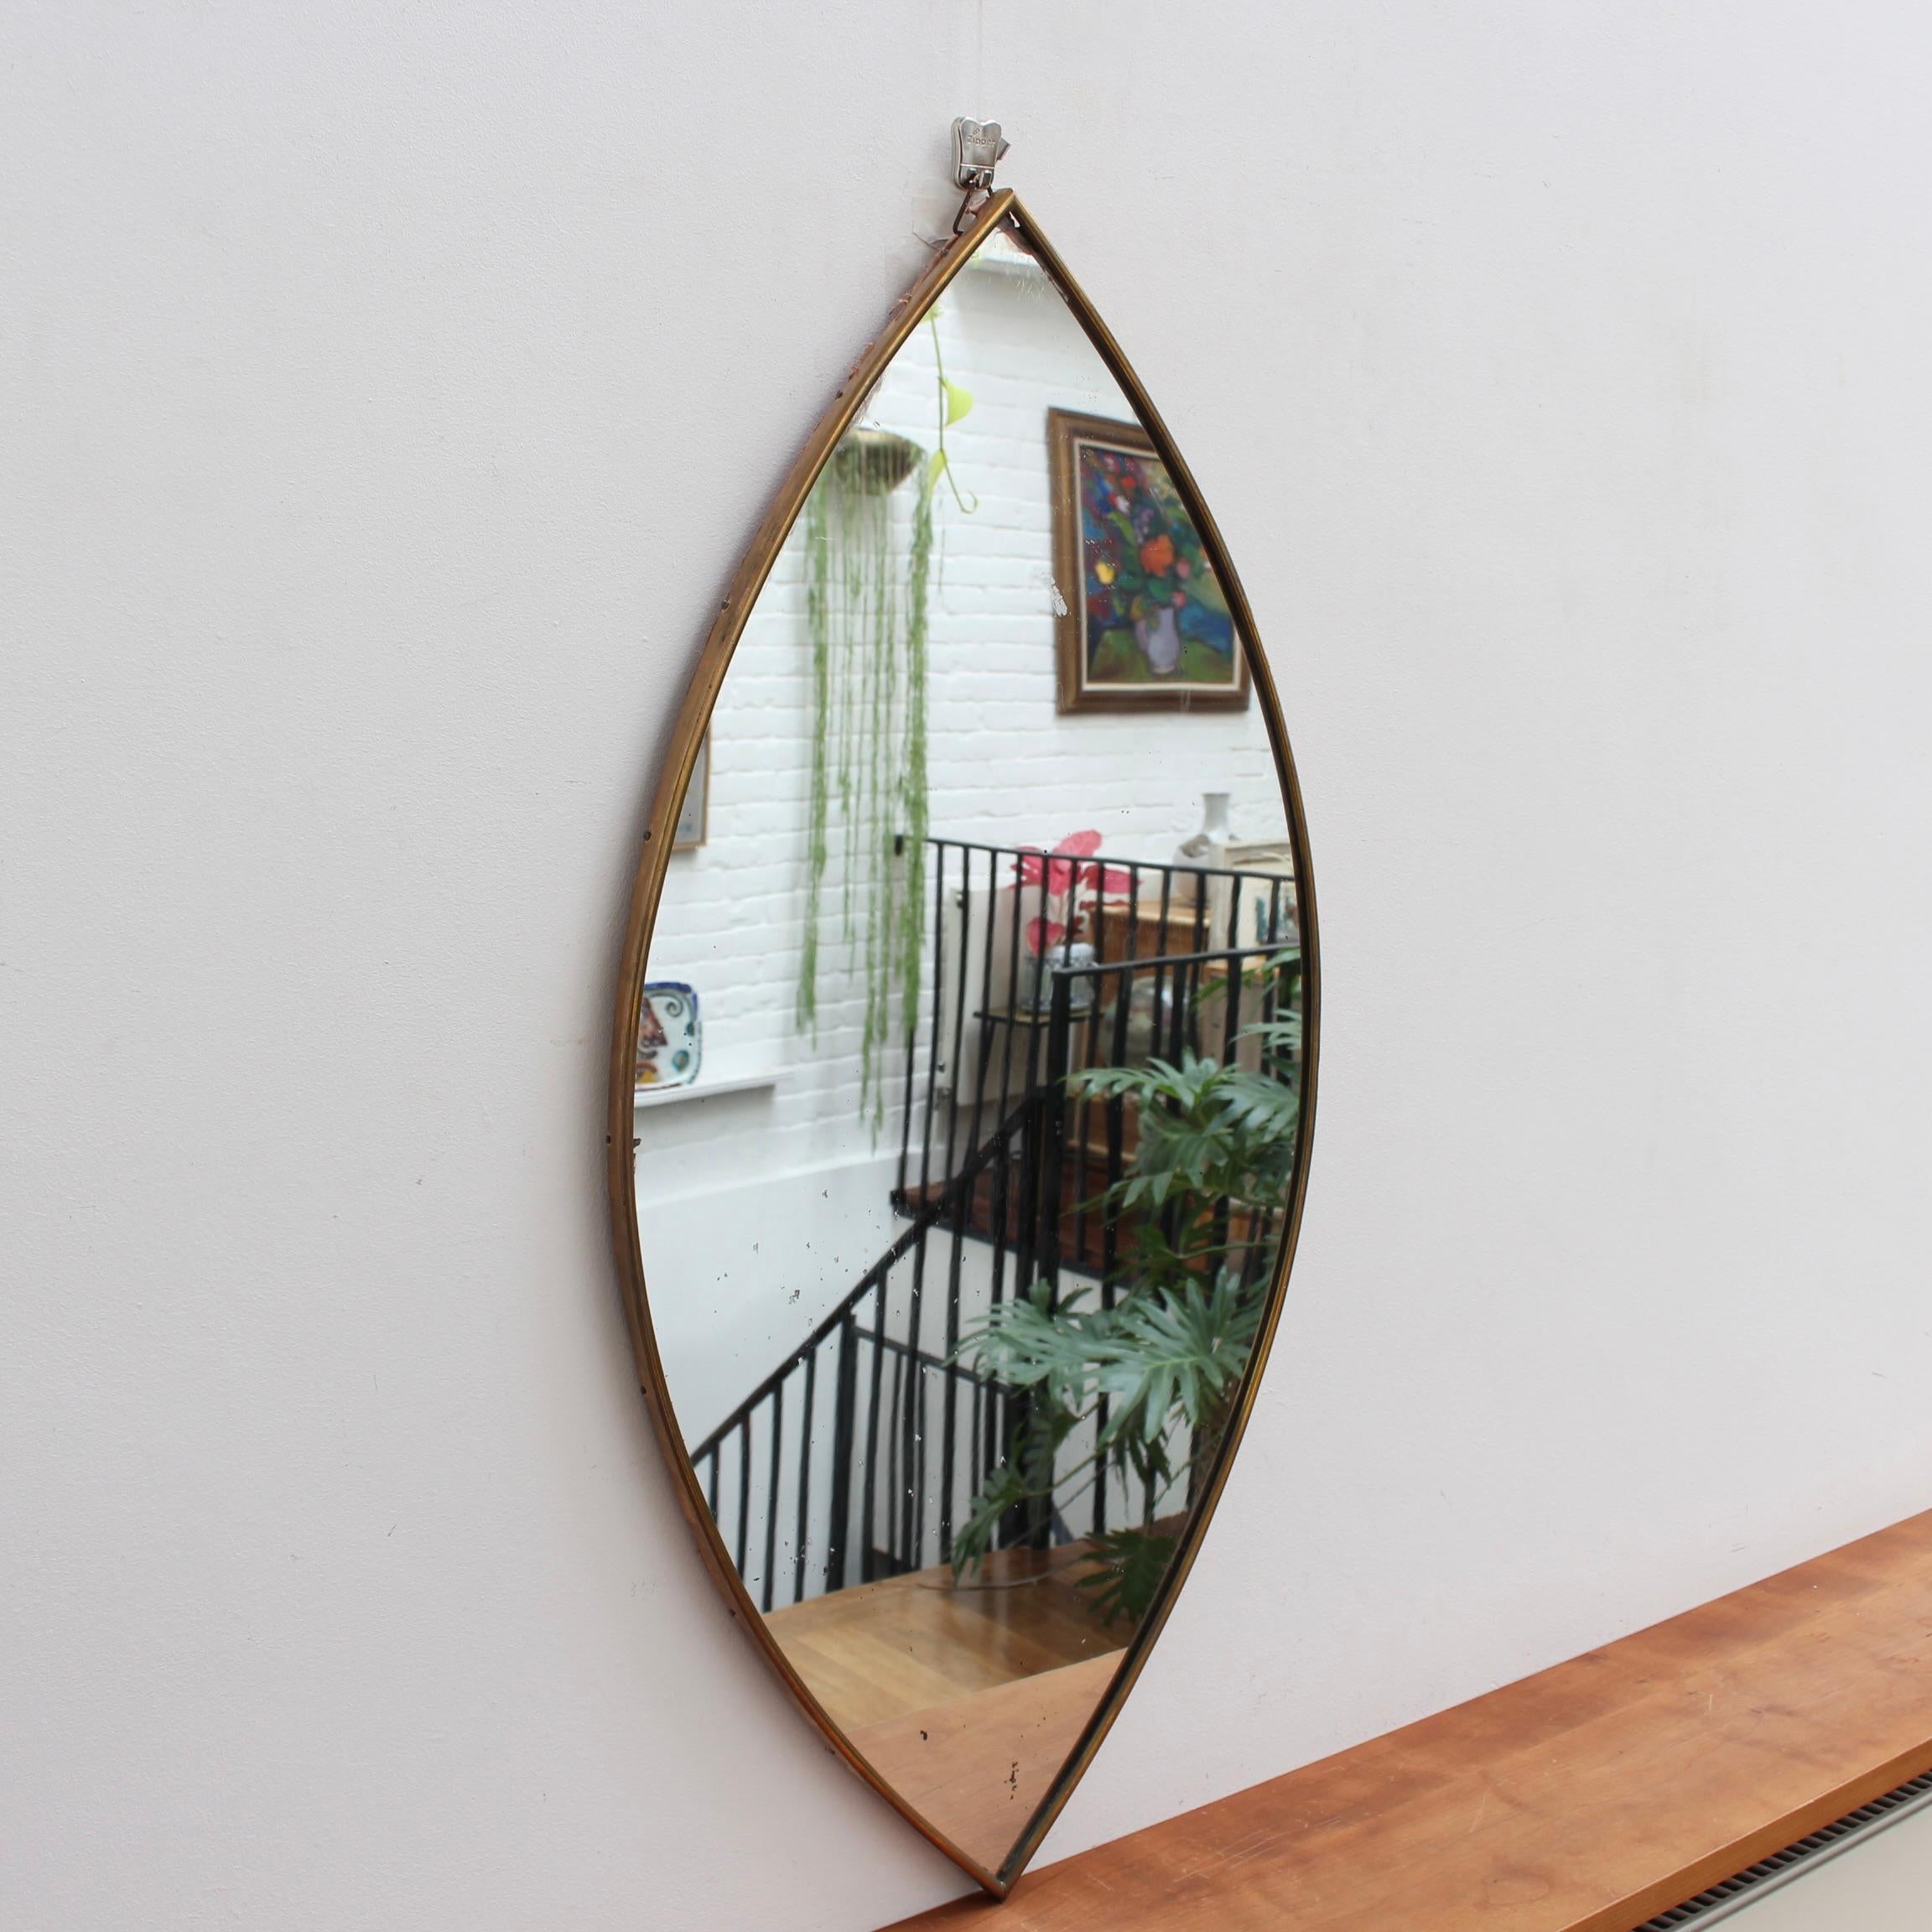 Mid-Century Italian wall mirror with brass frame (circa 1950s). This mirror is elegant and characterful in a modern style. It is a leaf-shaped piece in fair overall condition. A patina covers much of the brass frame. Please note there are some